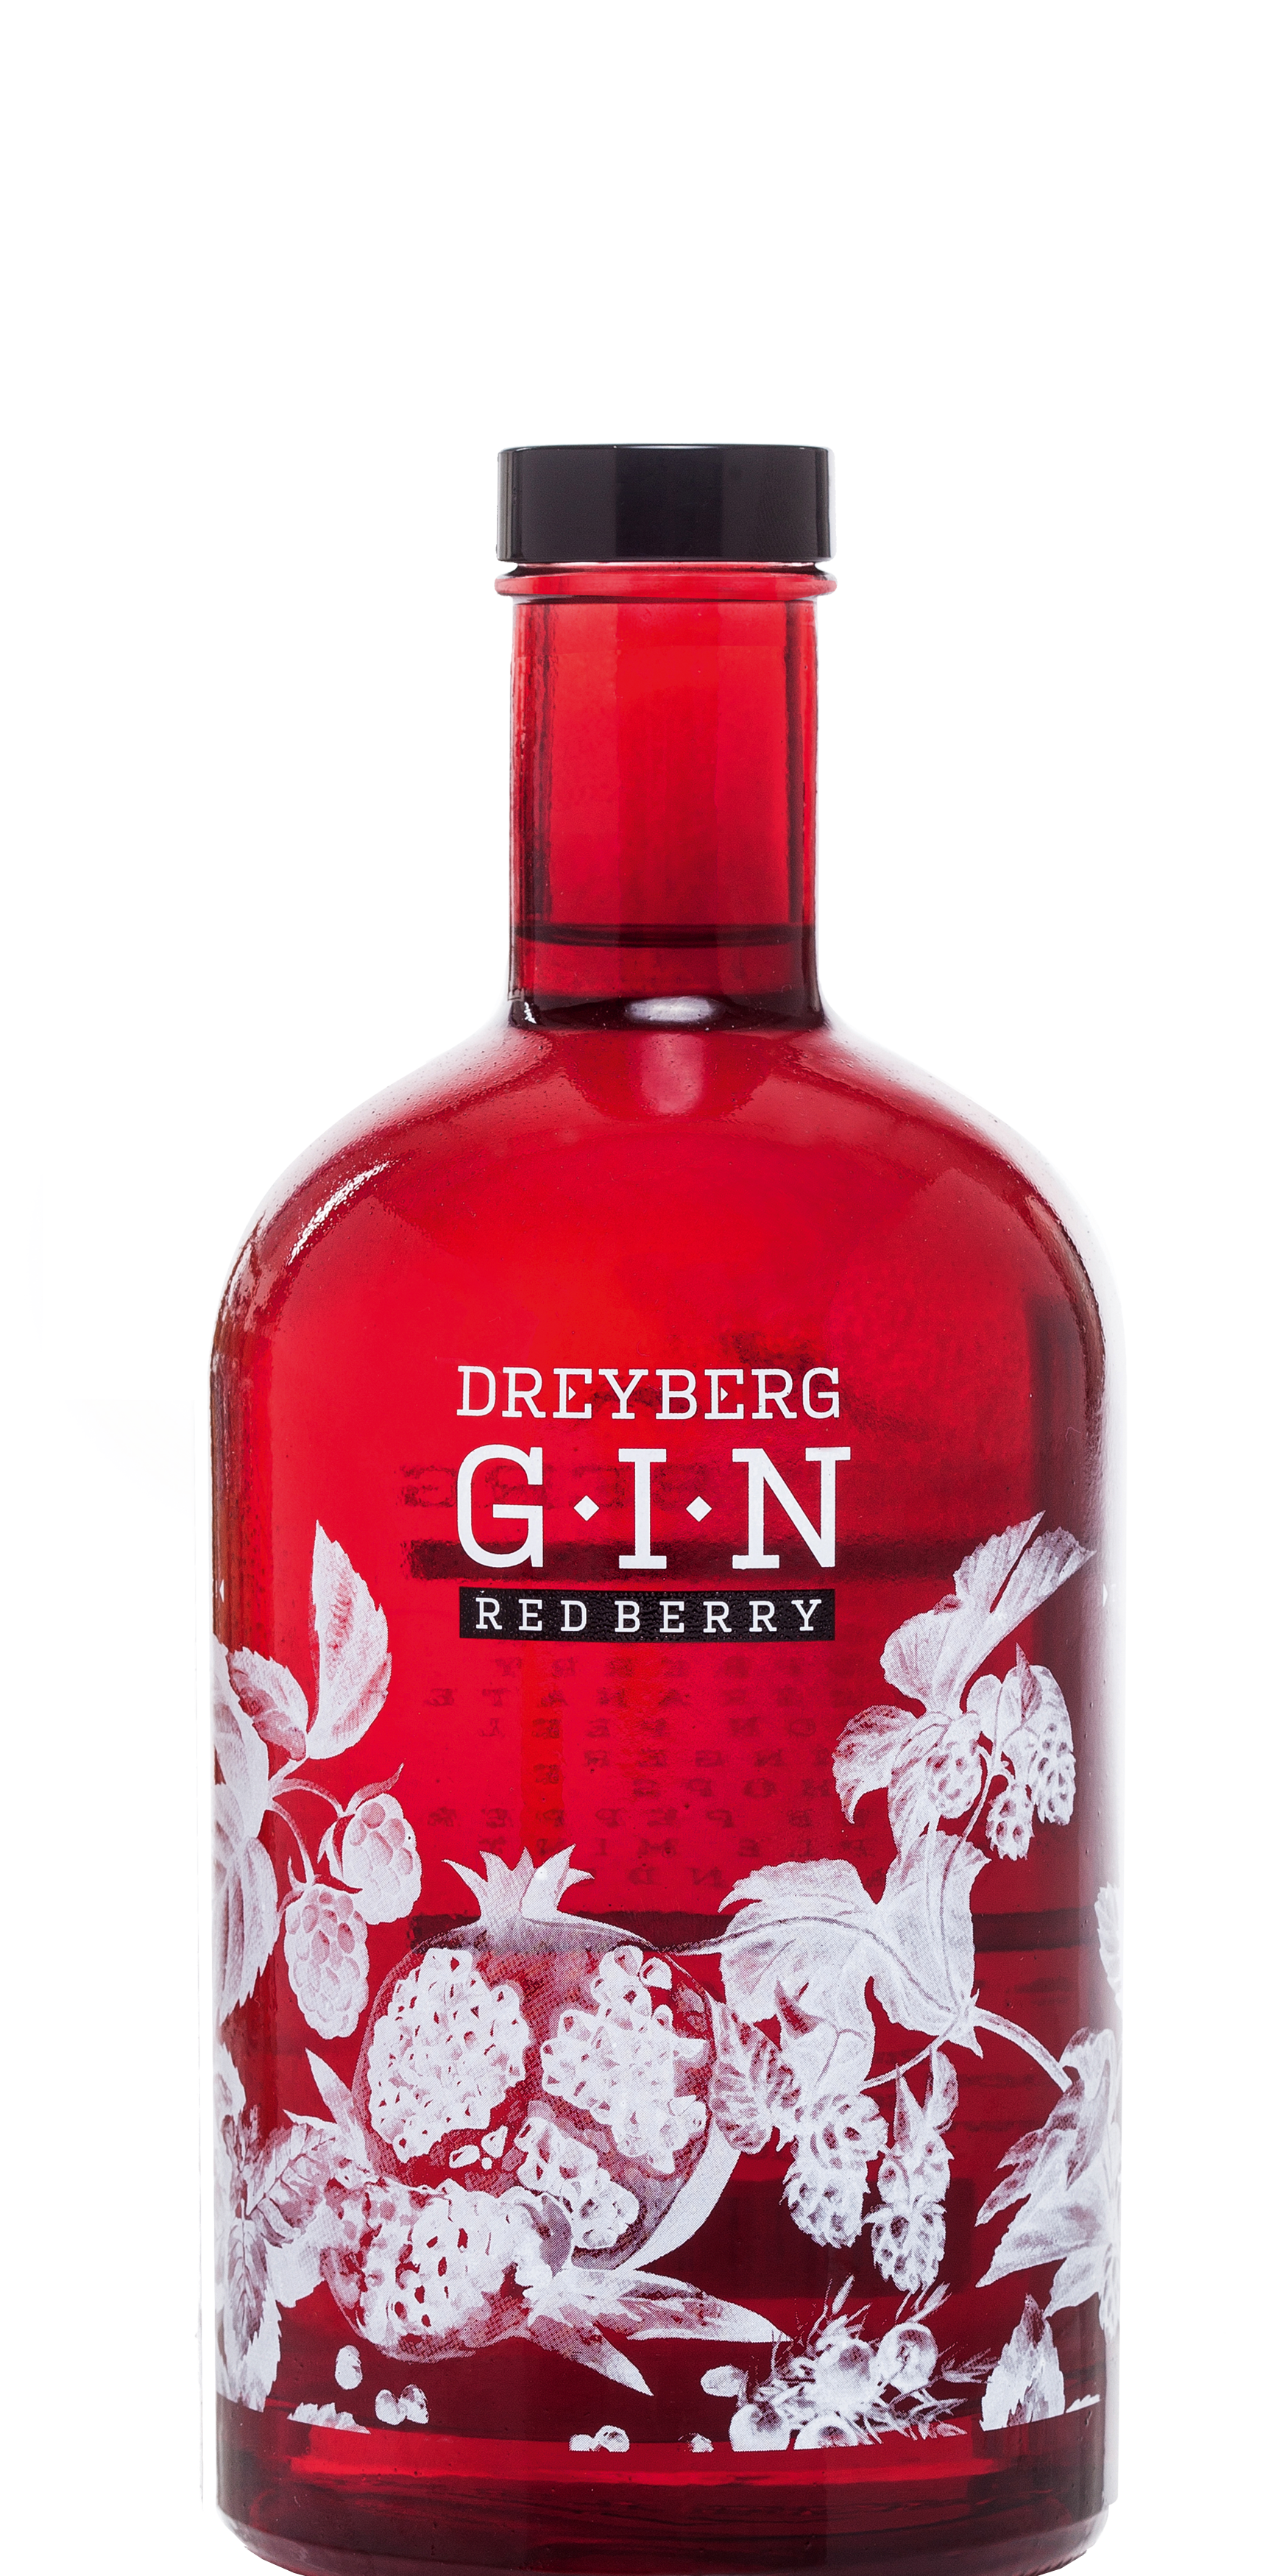 dreyberg-Red-Berry-Gin-700ml.png